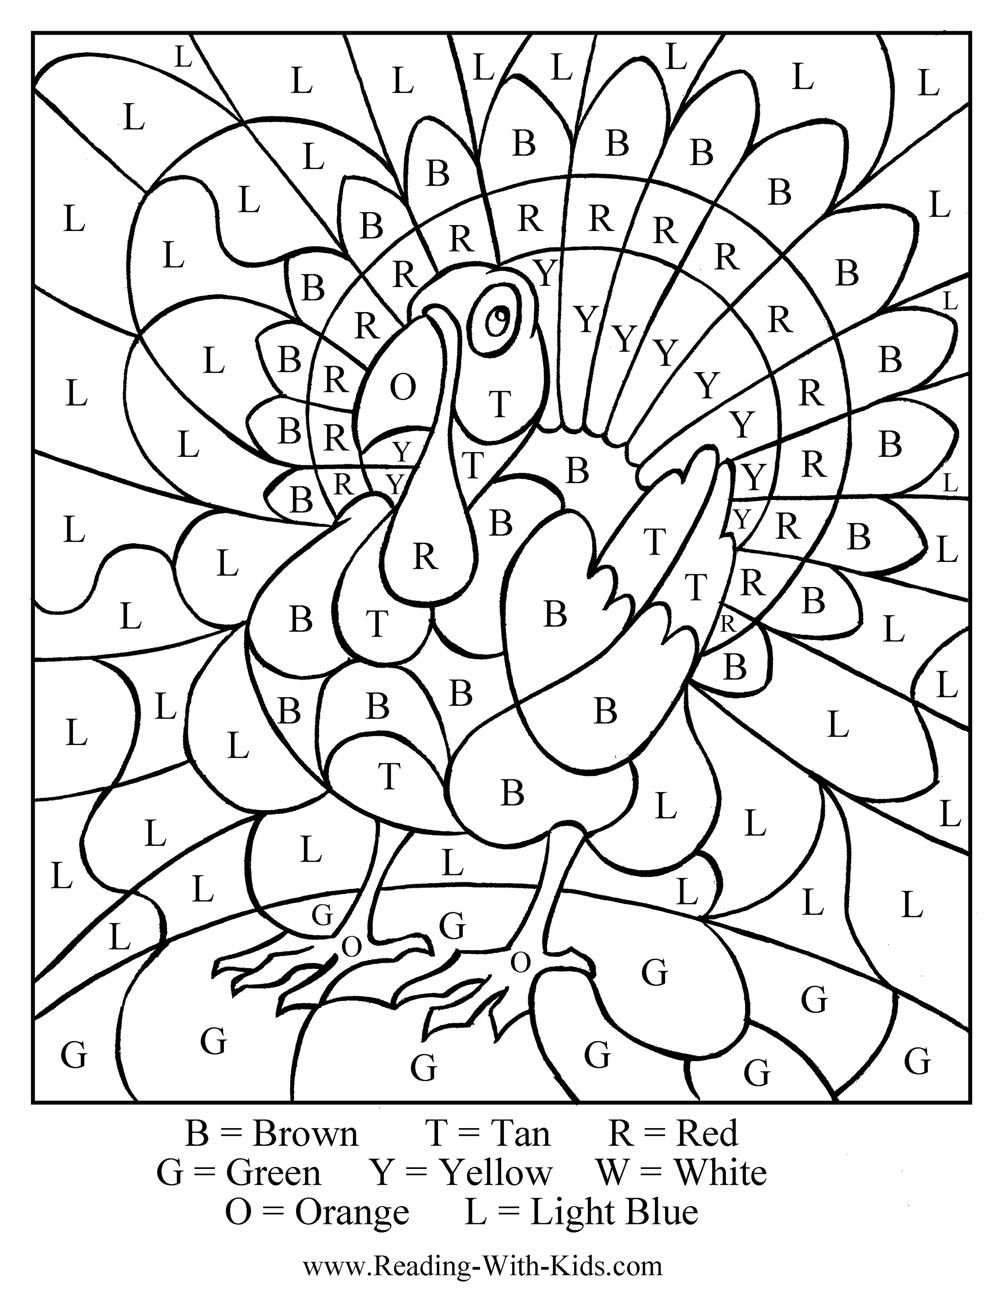 Free Printable Thanksgiving Coloring Pages | Free Thanksgiving - Free Printable Thanksgiving Coloring Pages